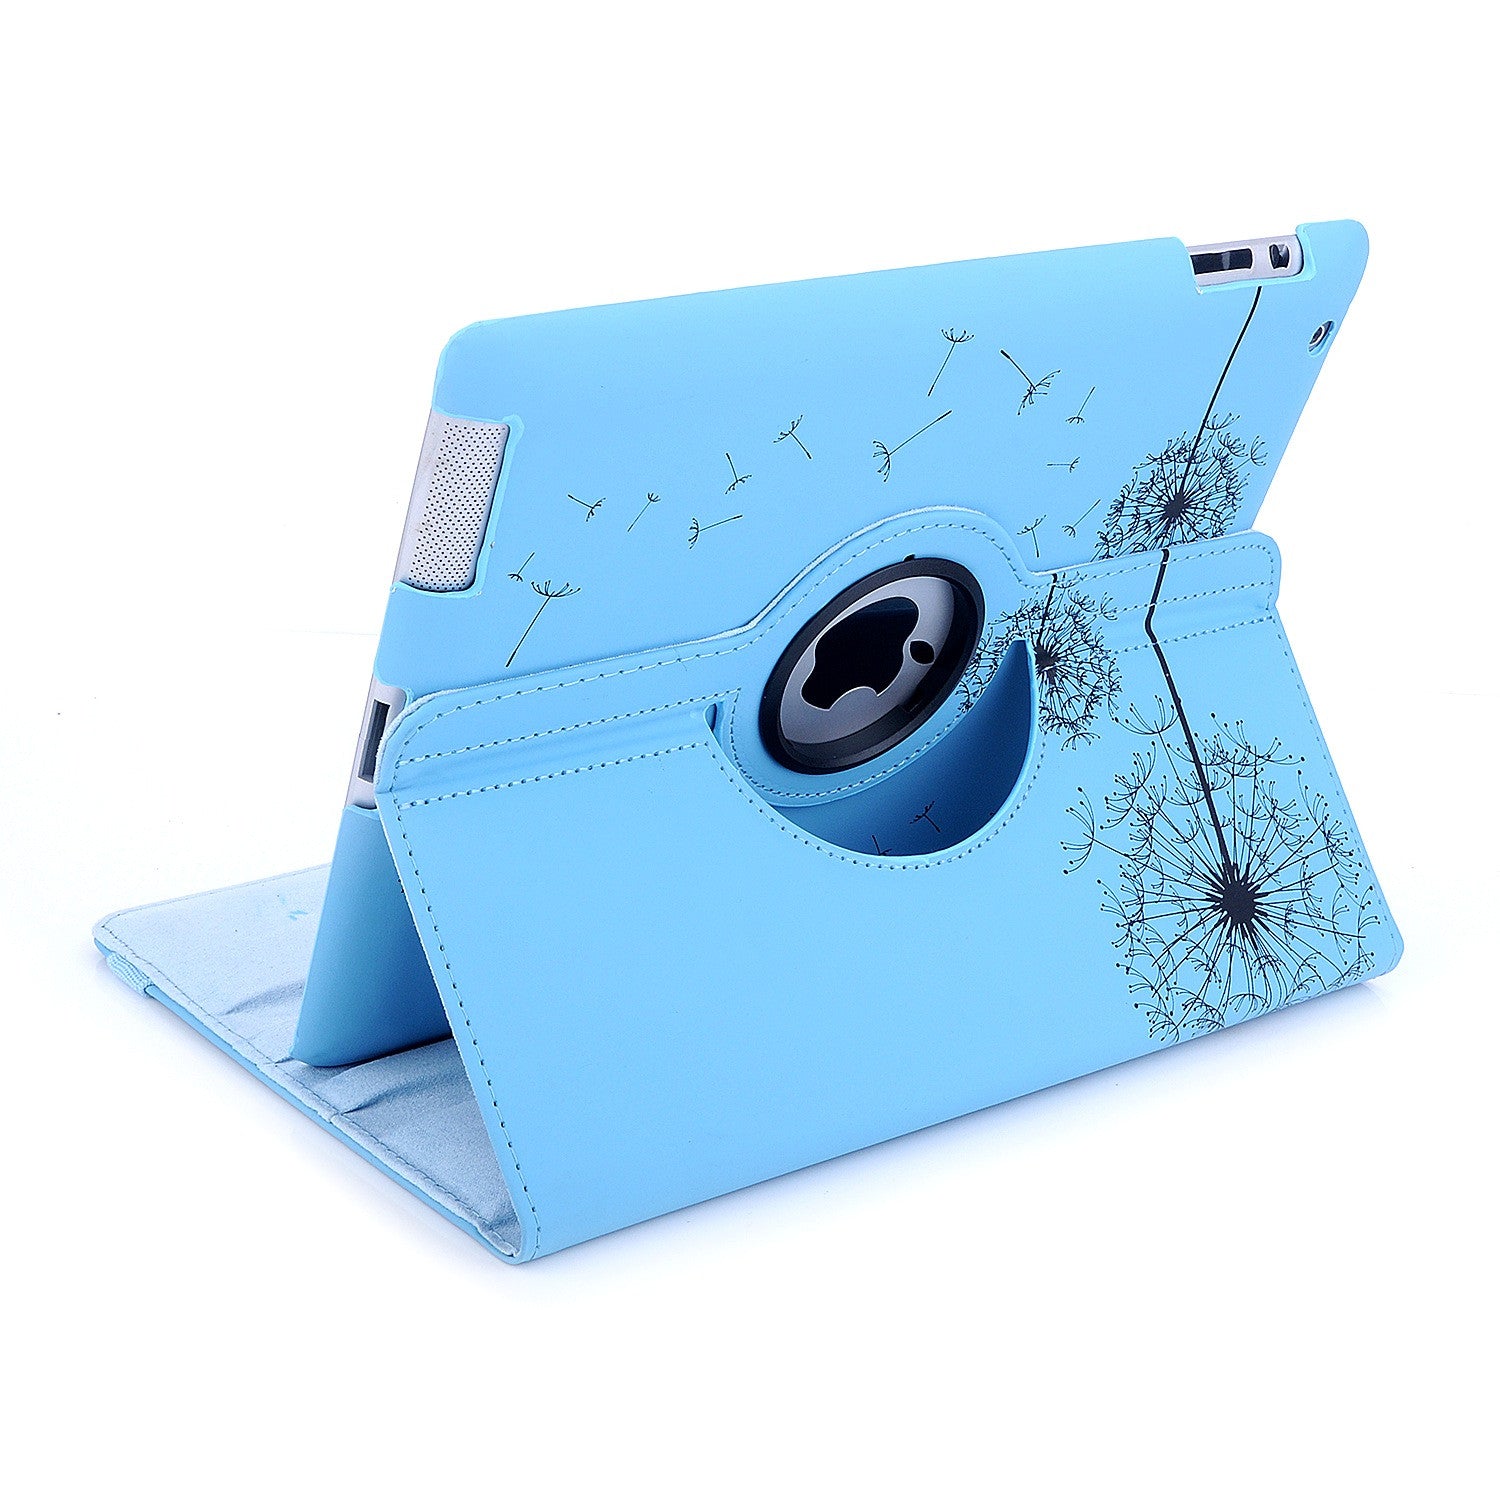 Bracevor Trendy Smart Leather Rotating Stand Case Cover for Apple iPad 2 3 4 - Blue